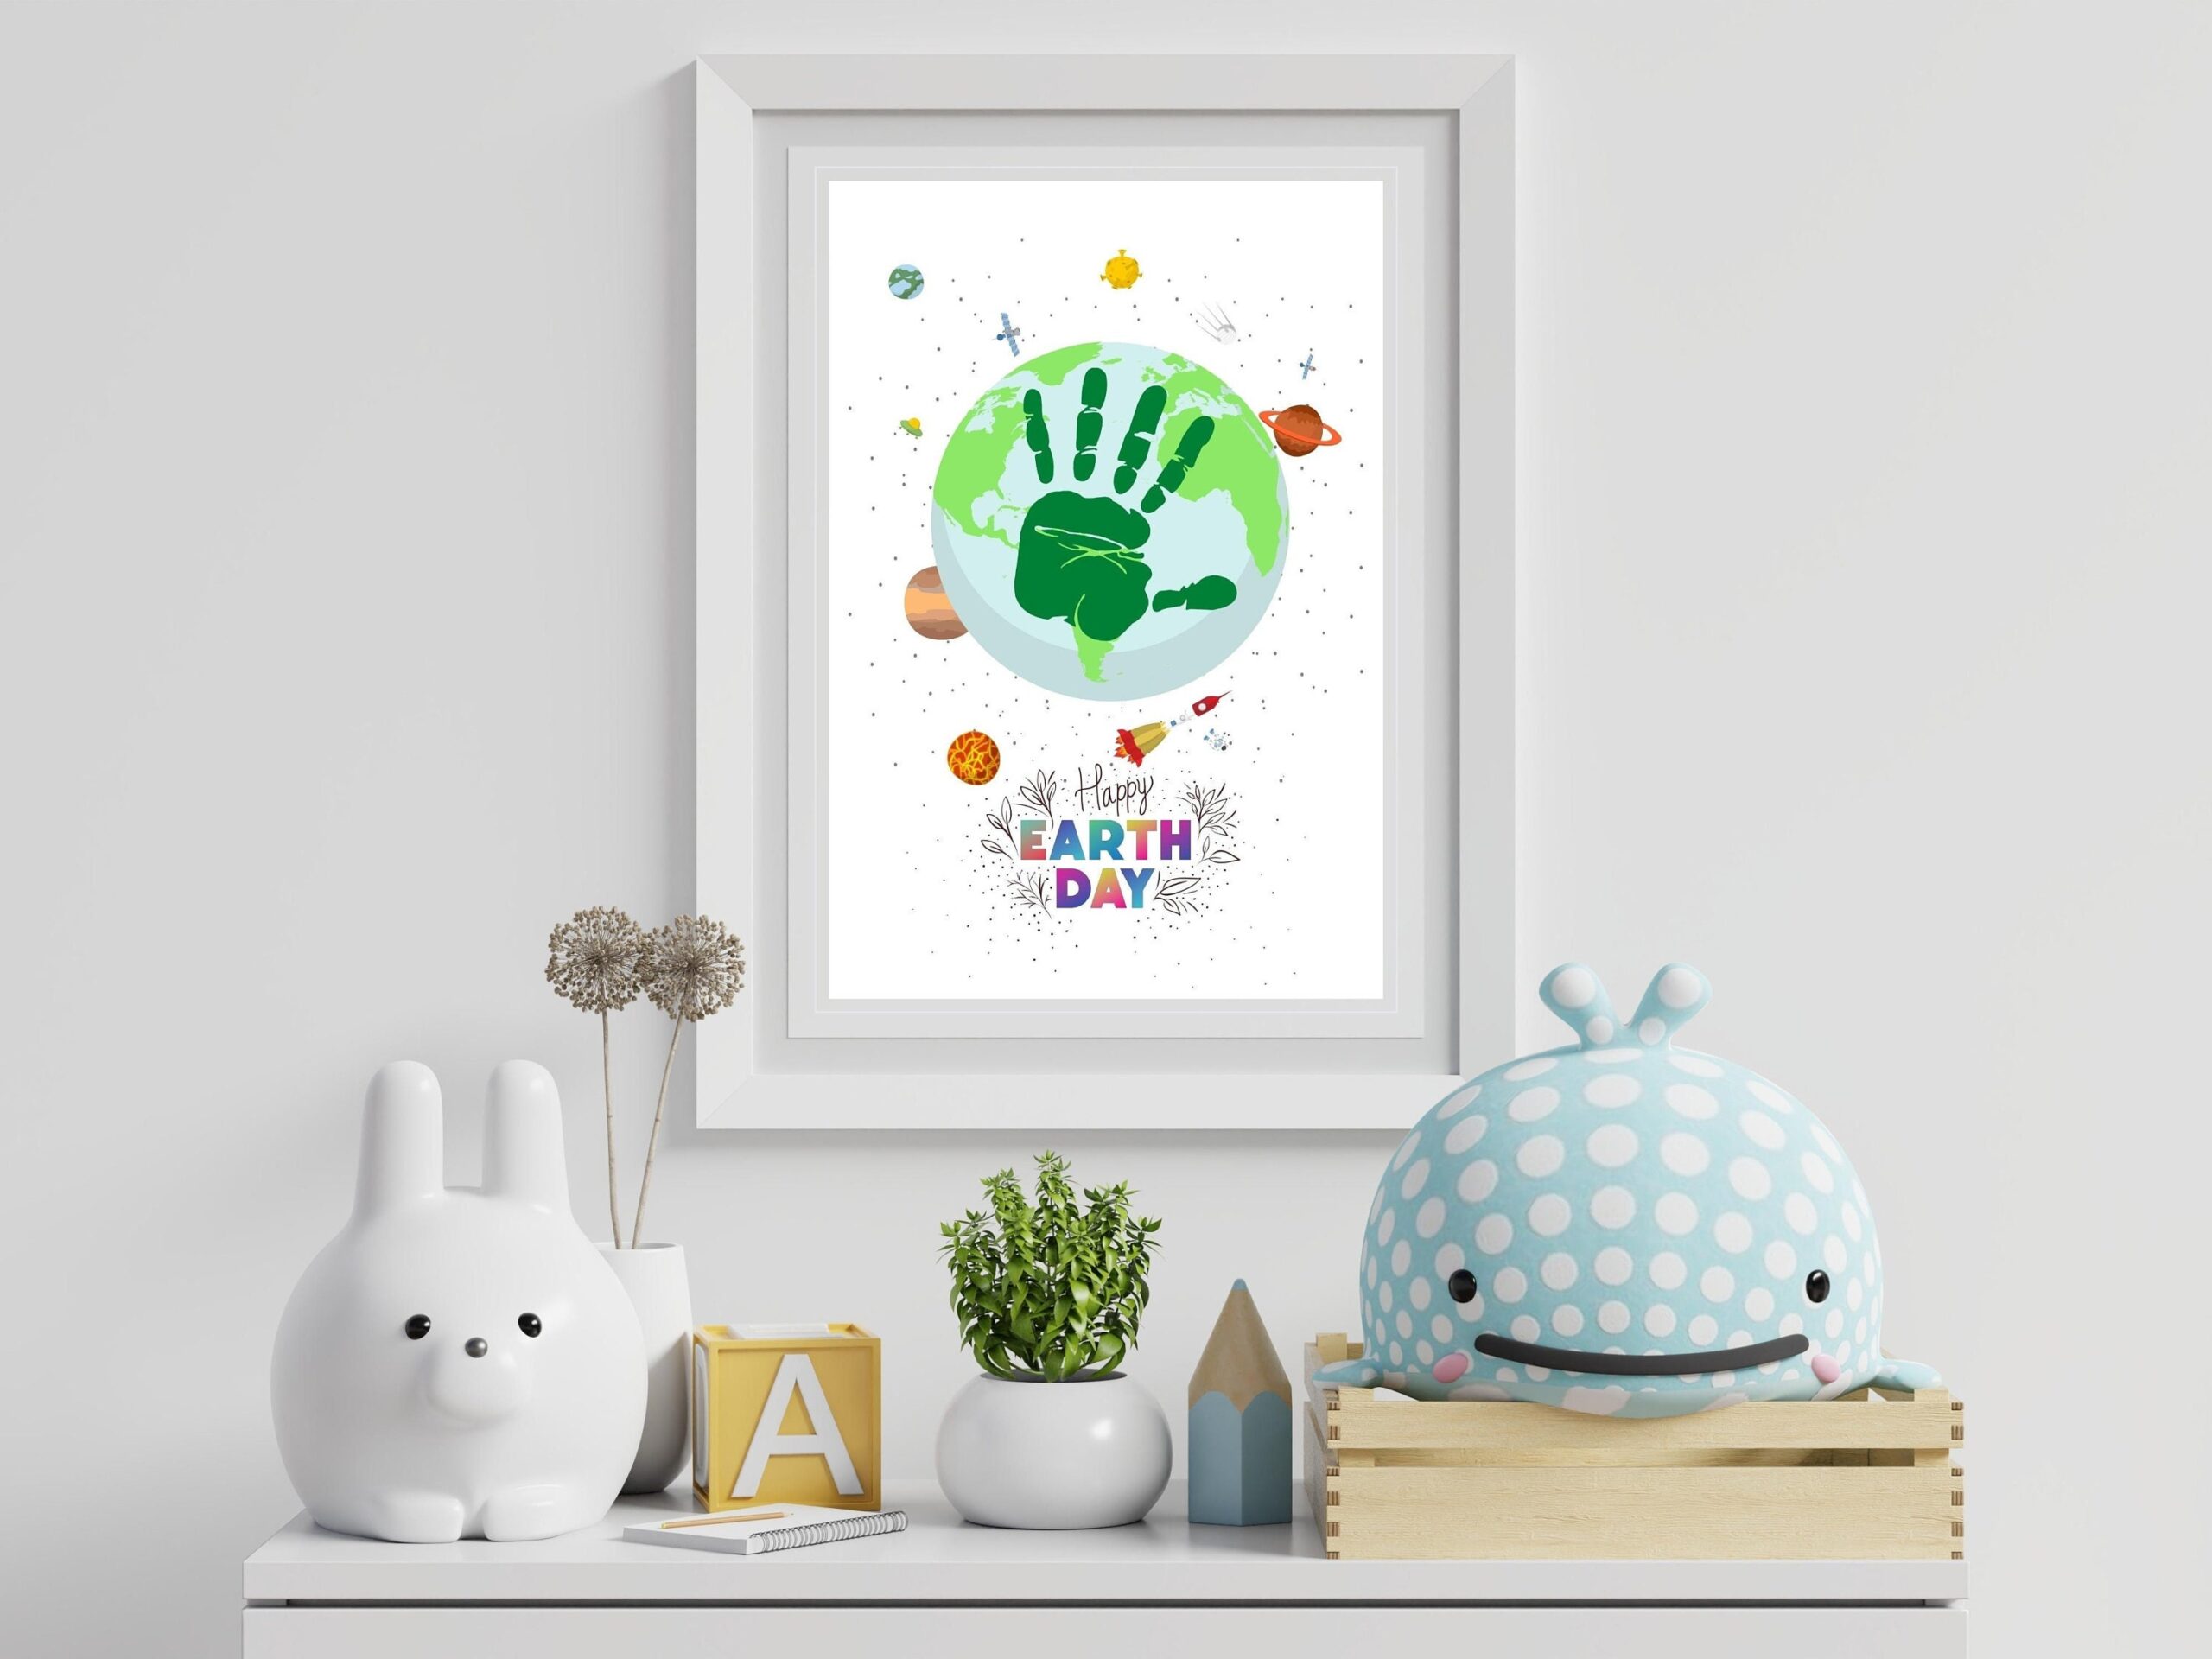 Happy Earth Day 2022 Poster Wall Art